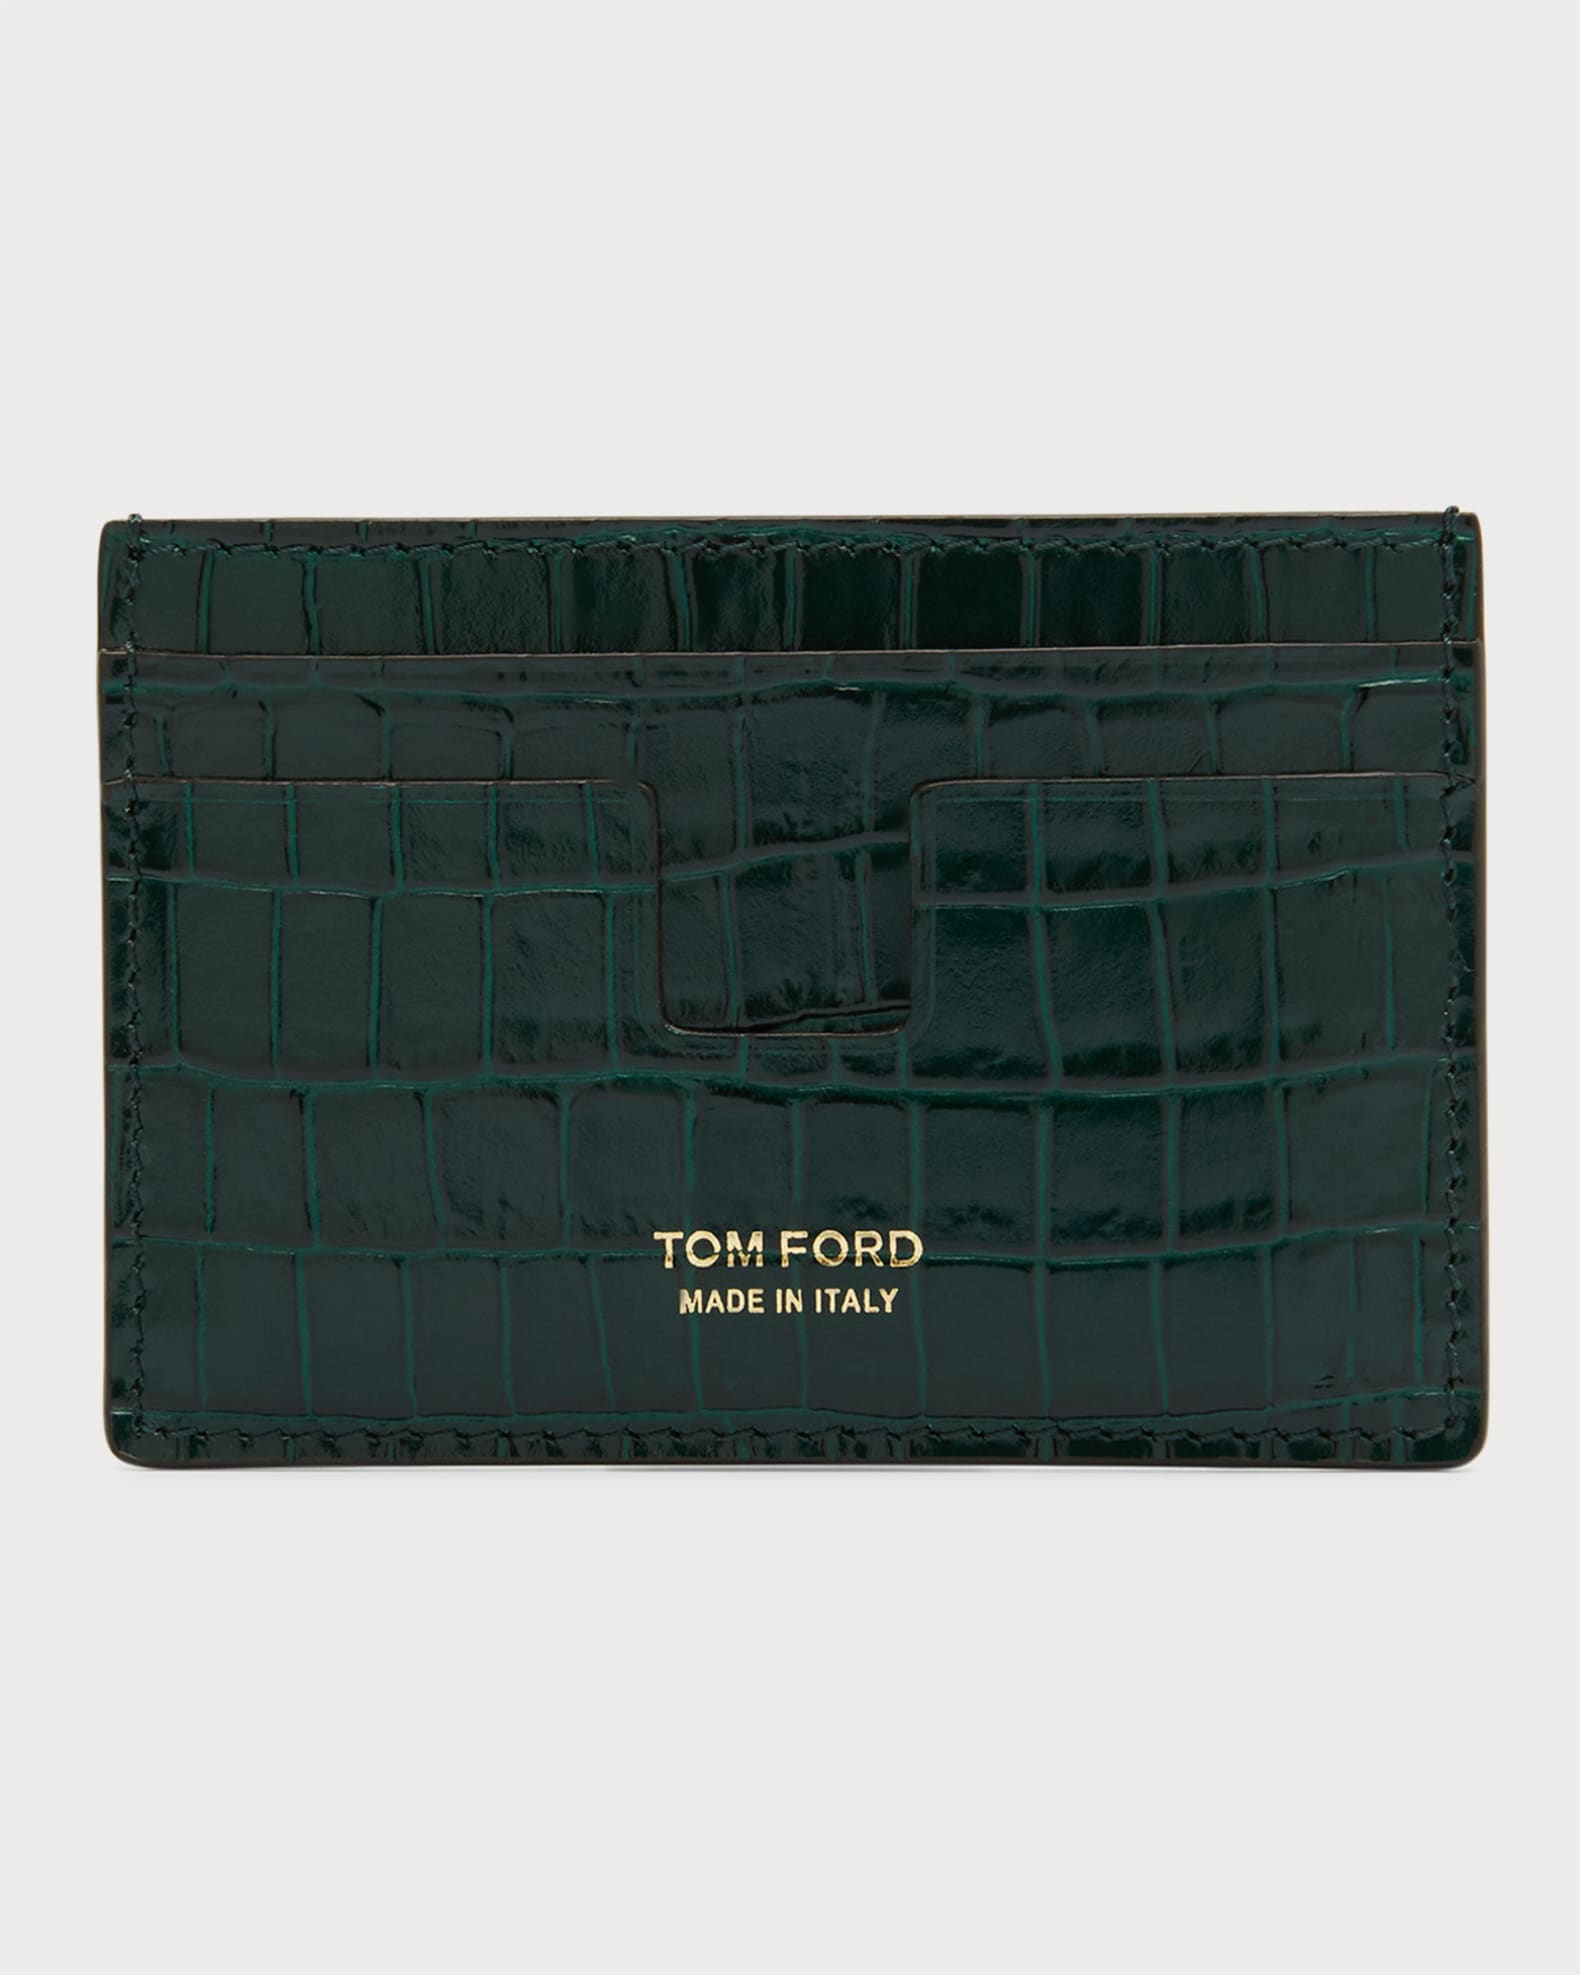 TOM FORD Men's Croc-Printed Leather T-Line Card Holder | Neiman Marcus